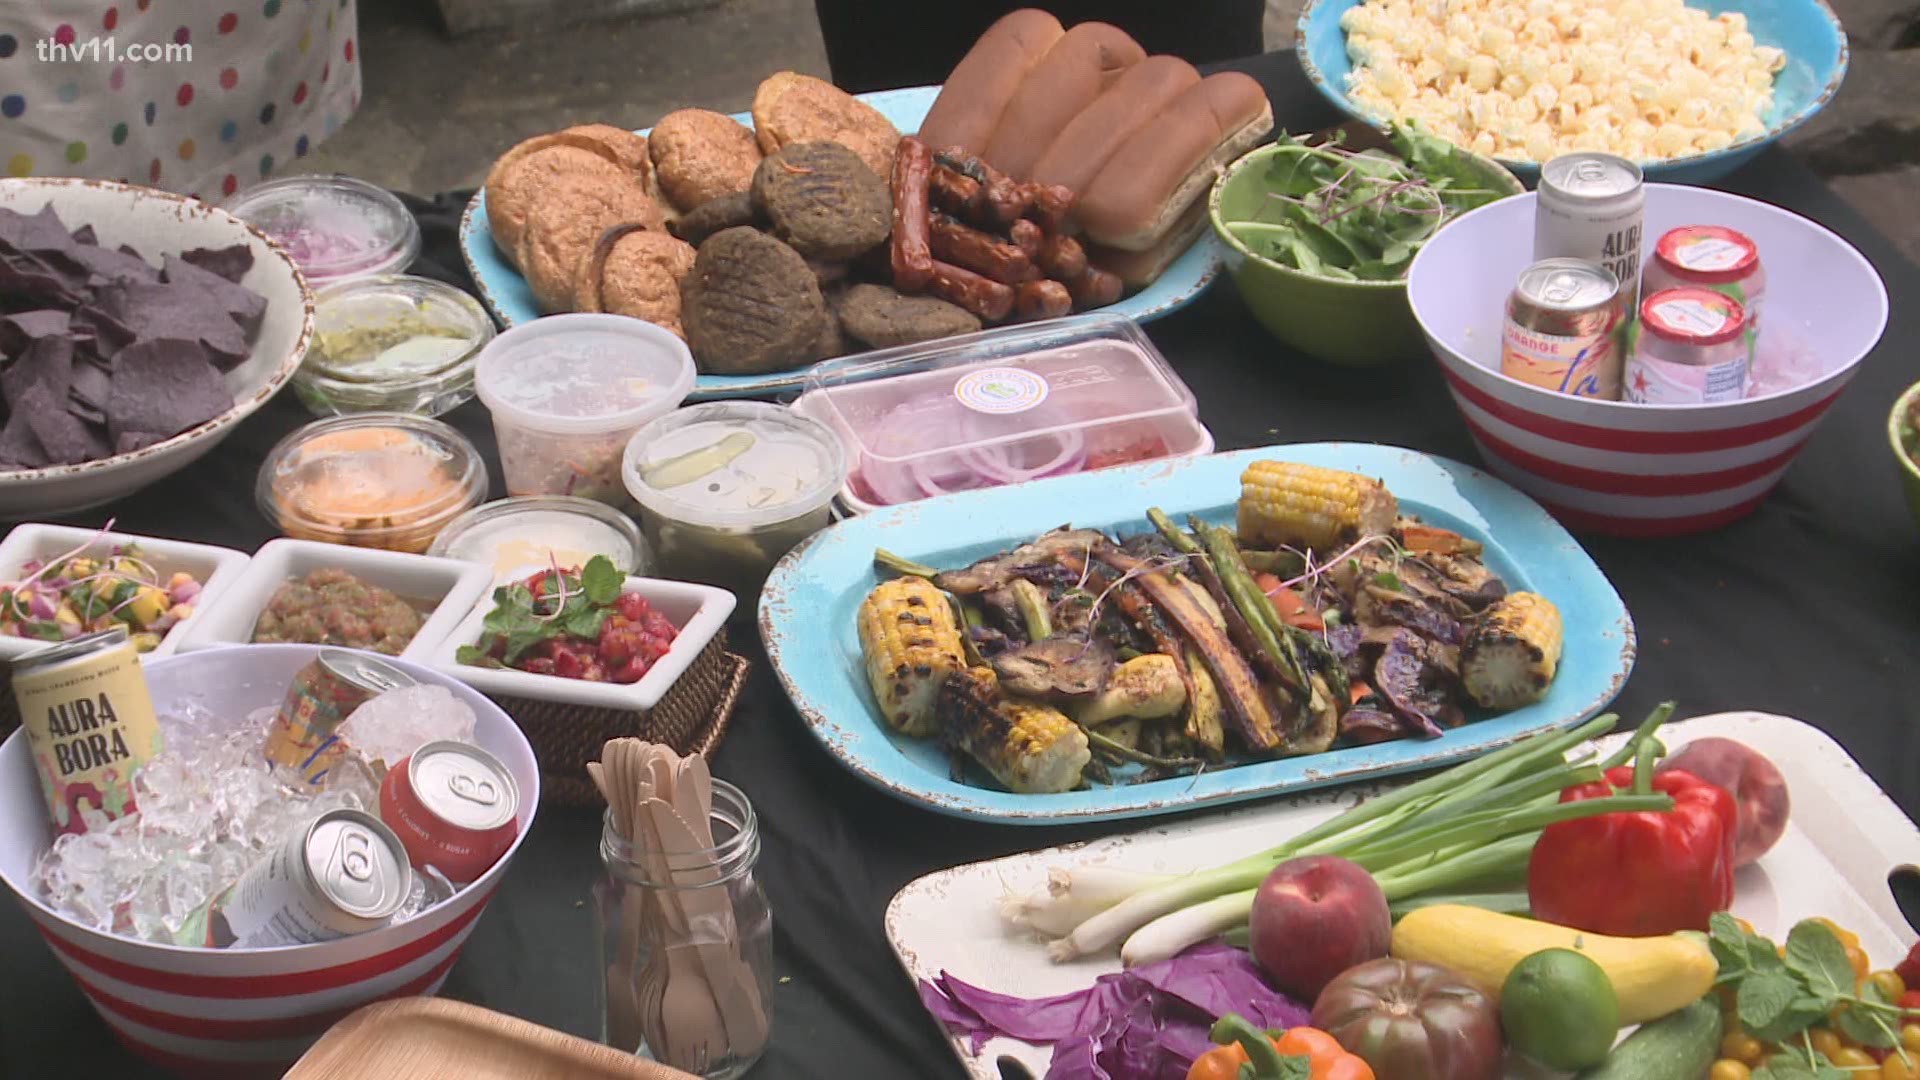 The 4th of July is a popular time for a backyard cookout, and chef Alicia Watson with Vito and Vera has you covered with plenty of delicious plant-based options.